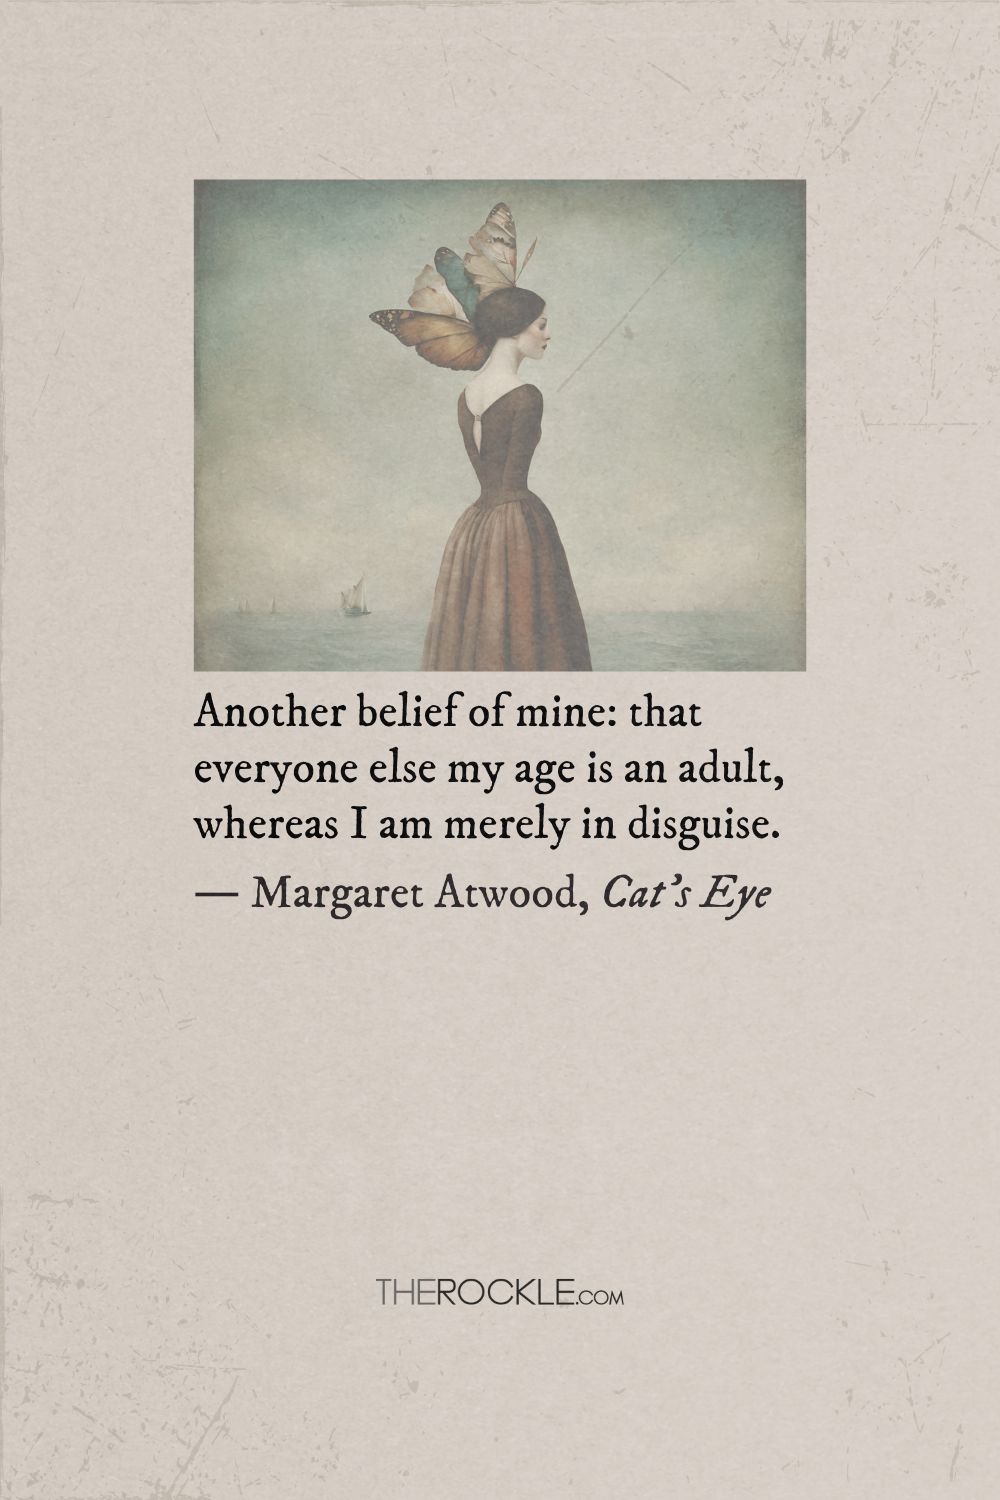 Margaret Atwood's quote about adulthood